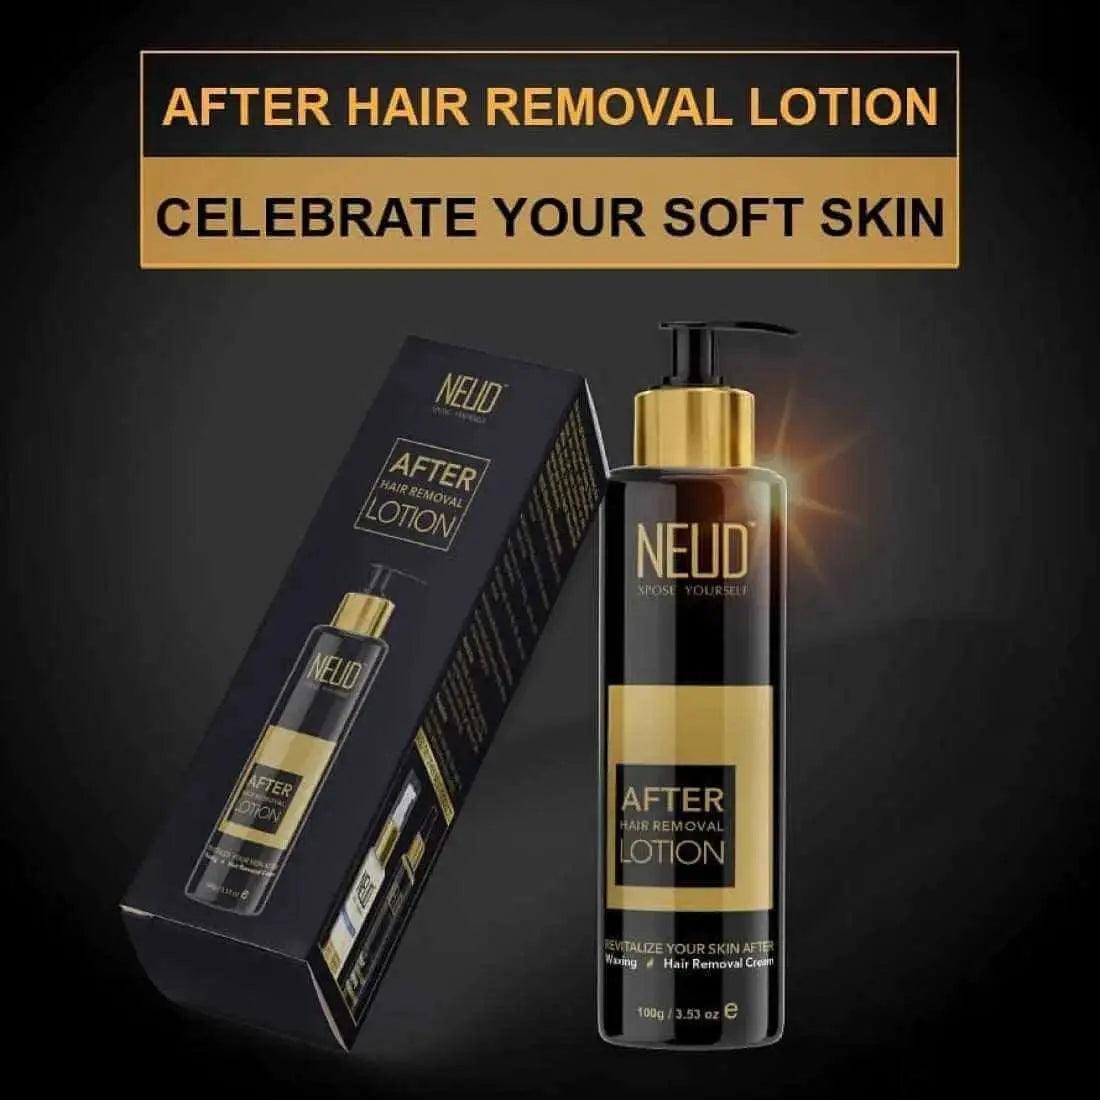 NEUD After-Hair-Removal Lotion for Skin Care in Men & Women - 100g